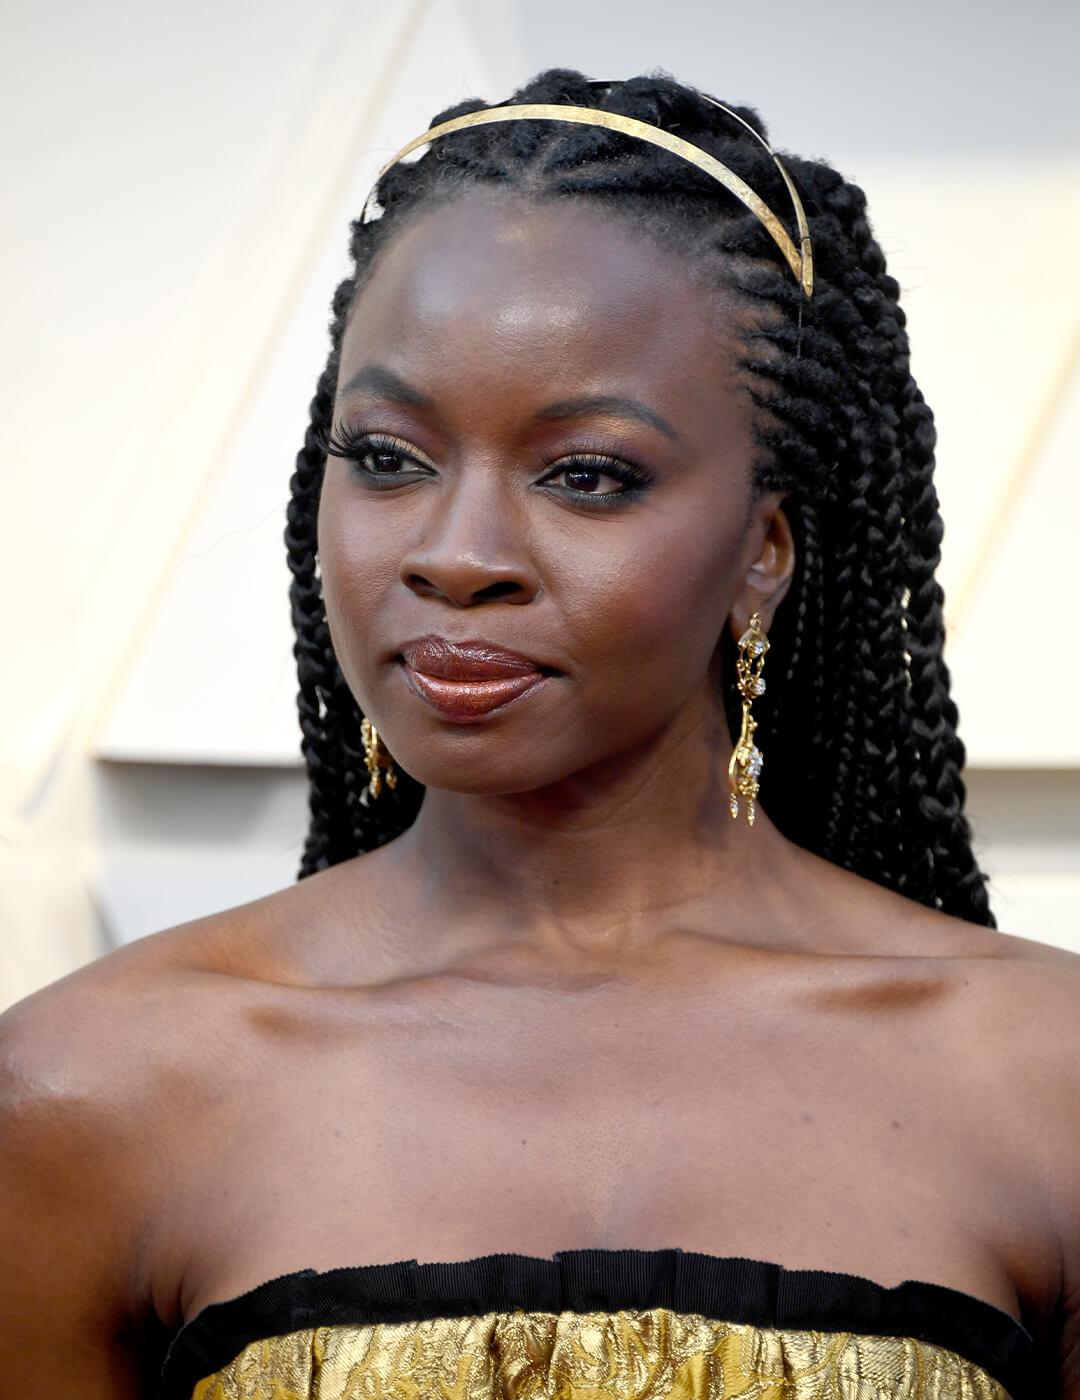 Danai Gurira looking glam in a black and gold dress, gold dangling earrings, and braided hairstyle